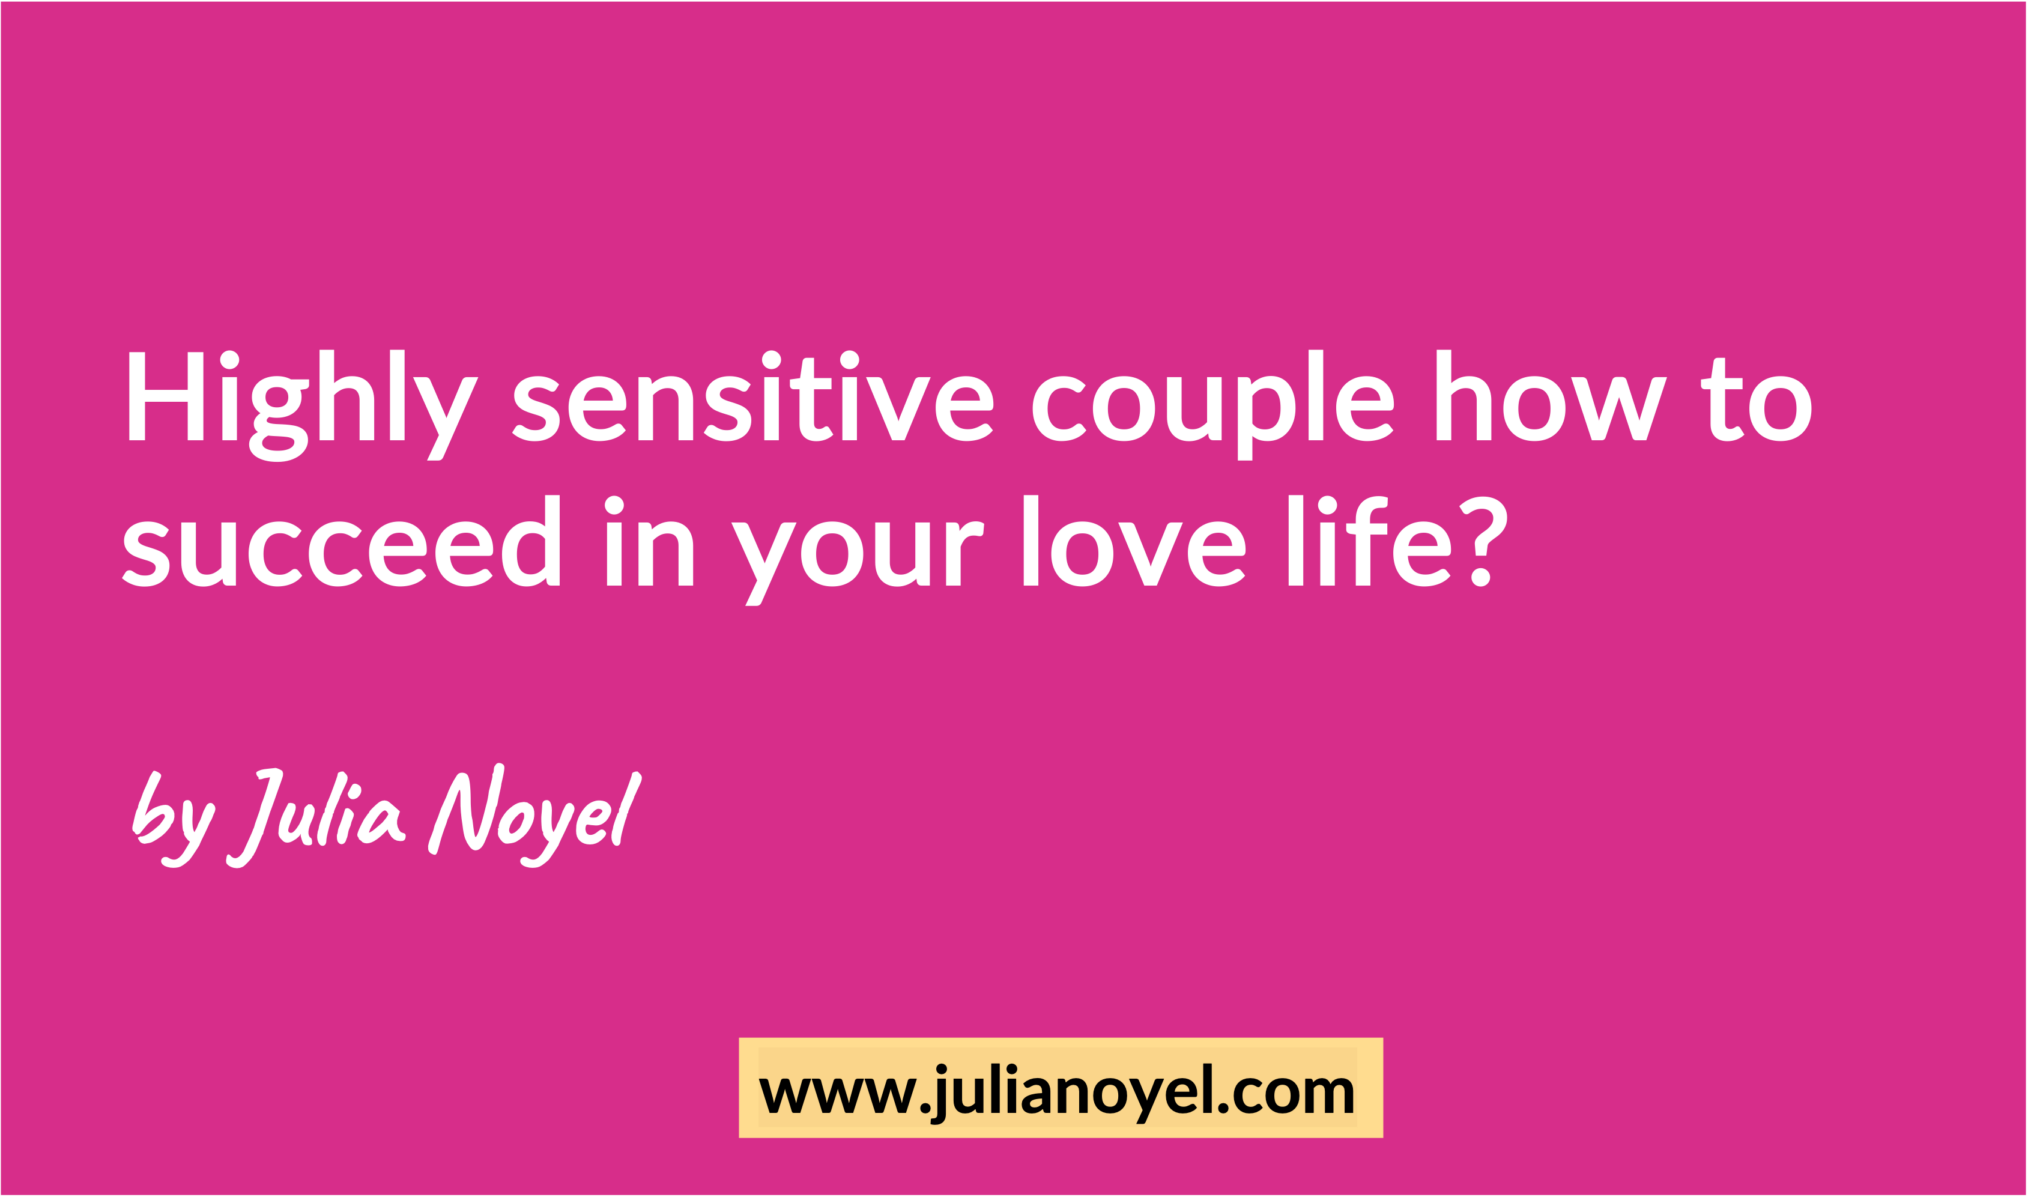 Highly sensitive couple how to succeed in your love life? by Julia Noyel